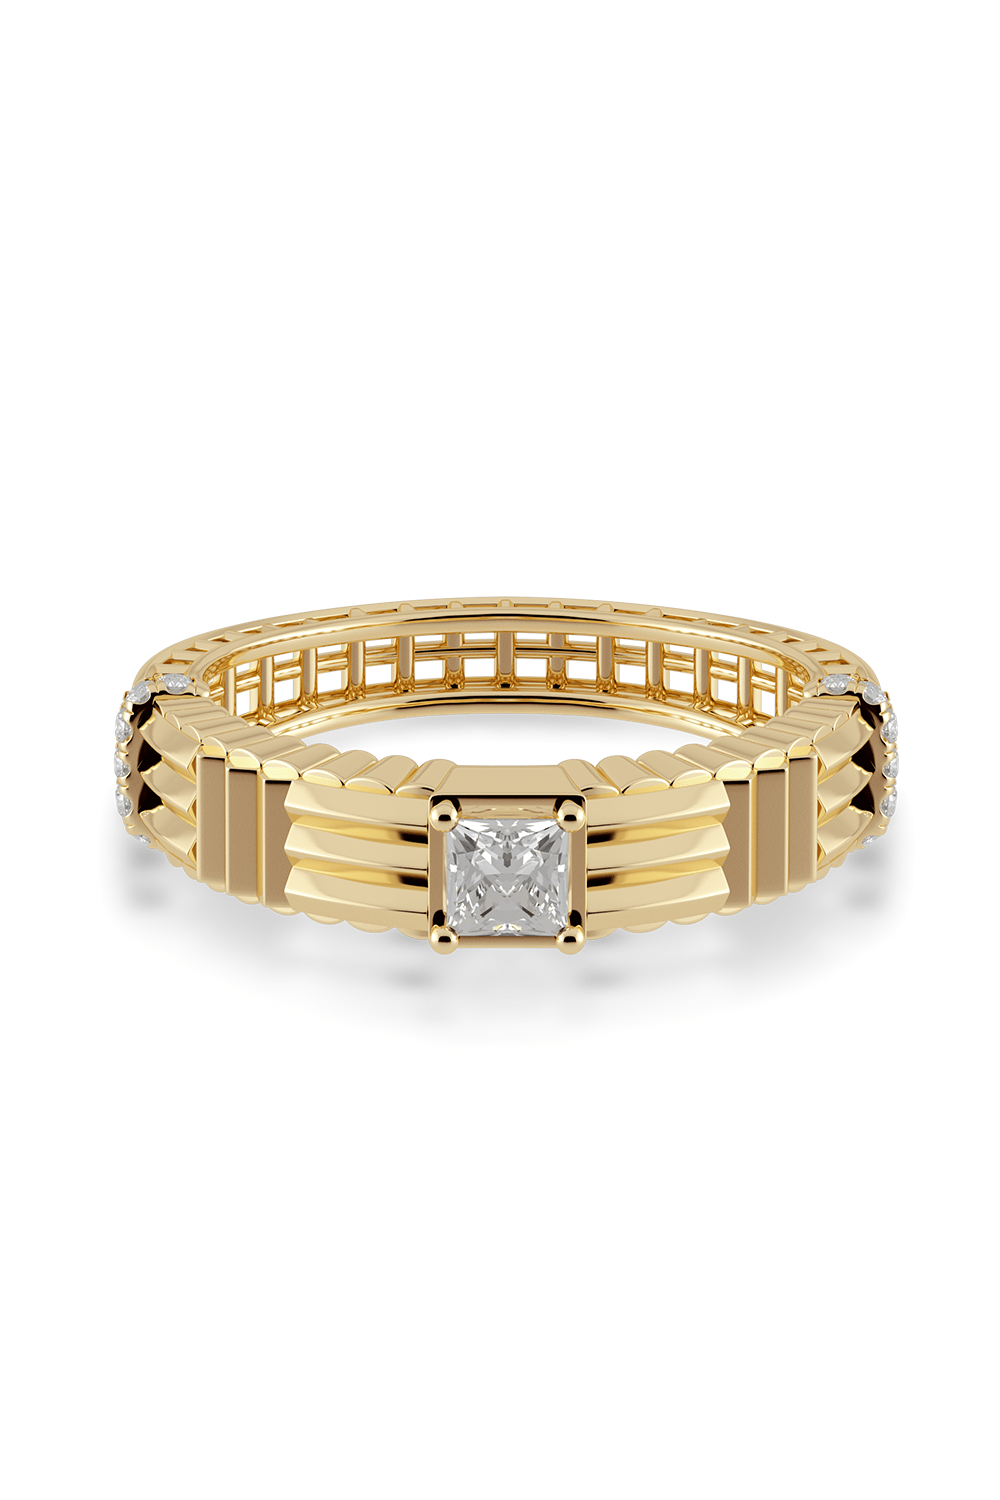 WOVEN OPEN SOLITAIRE PRINCESS DIAMOND RING JEWELRYFINE JEWELRING GWEN BELOTI COLLECTION   